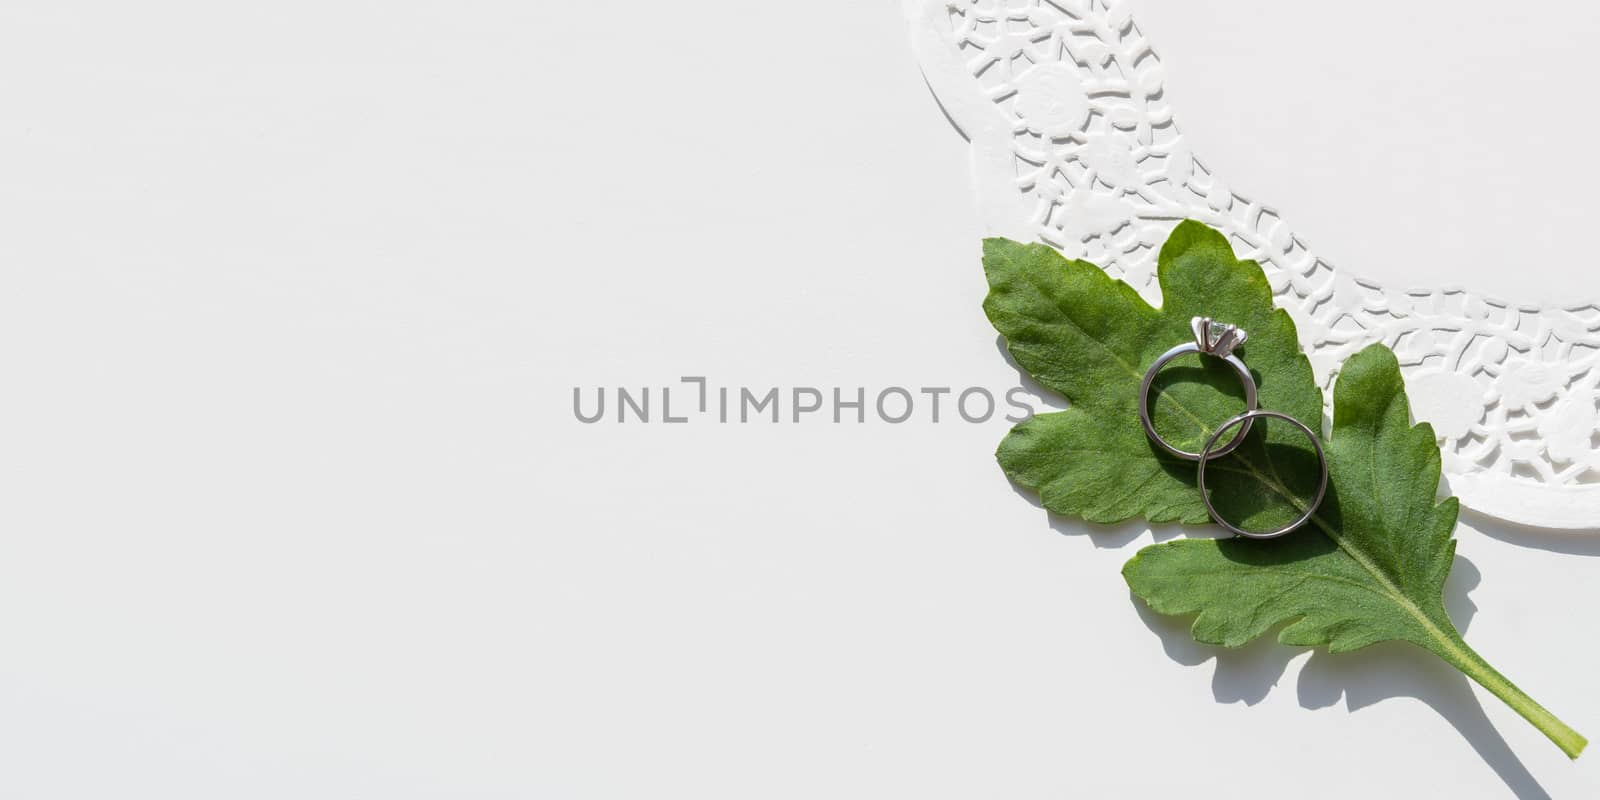 Top view on two wedding rings on green leaf. Plant with traditional jewelry accessories with laces napkin. White background with copy space.